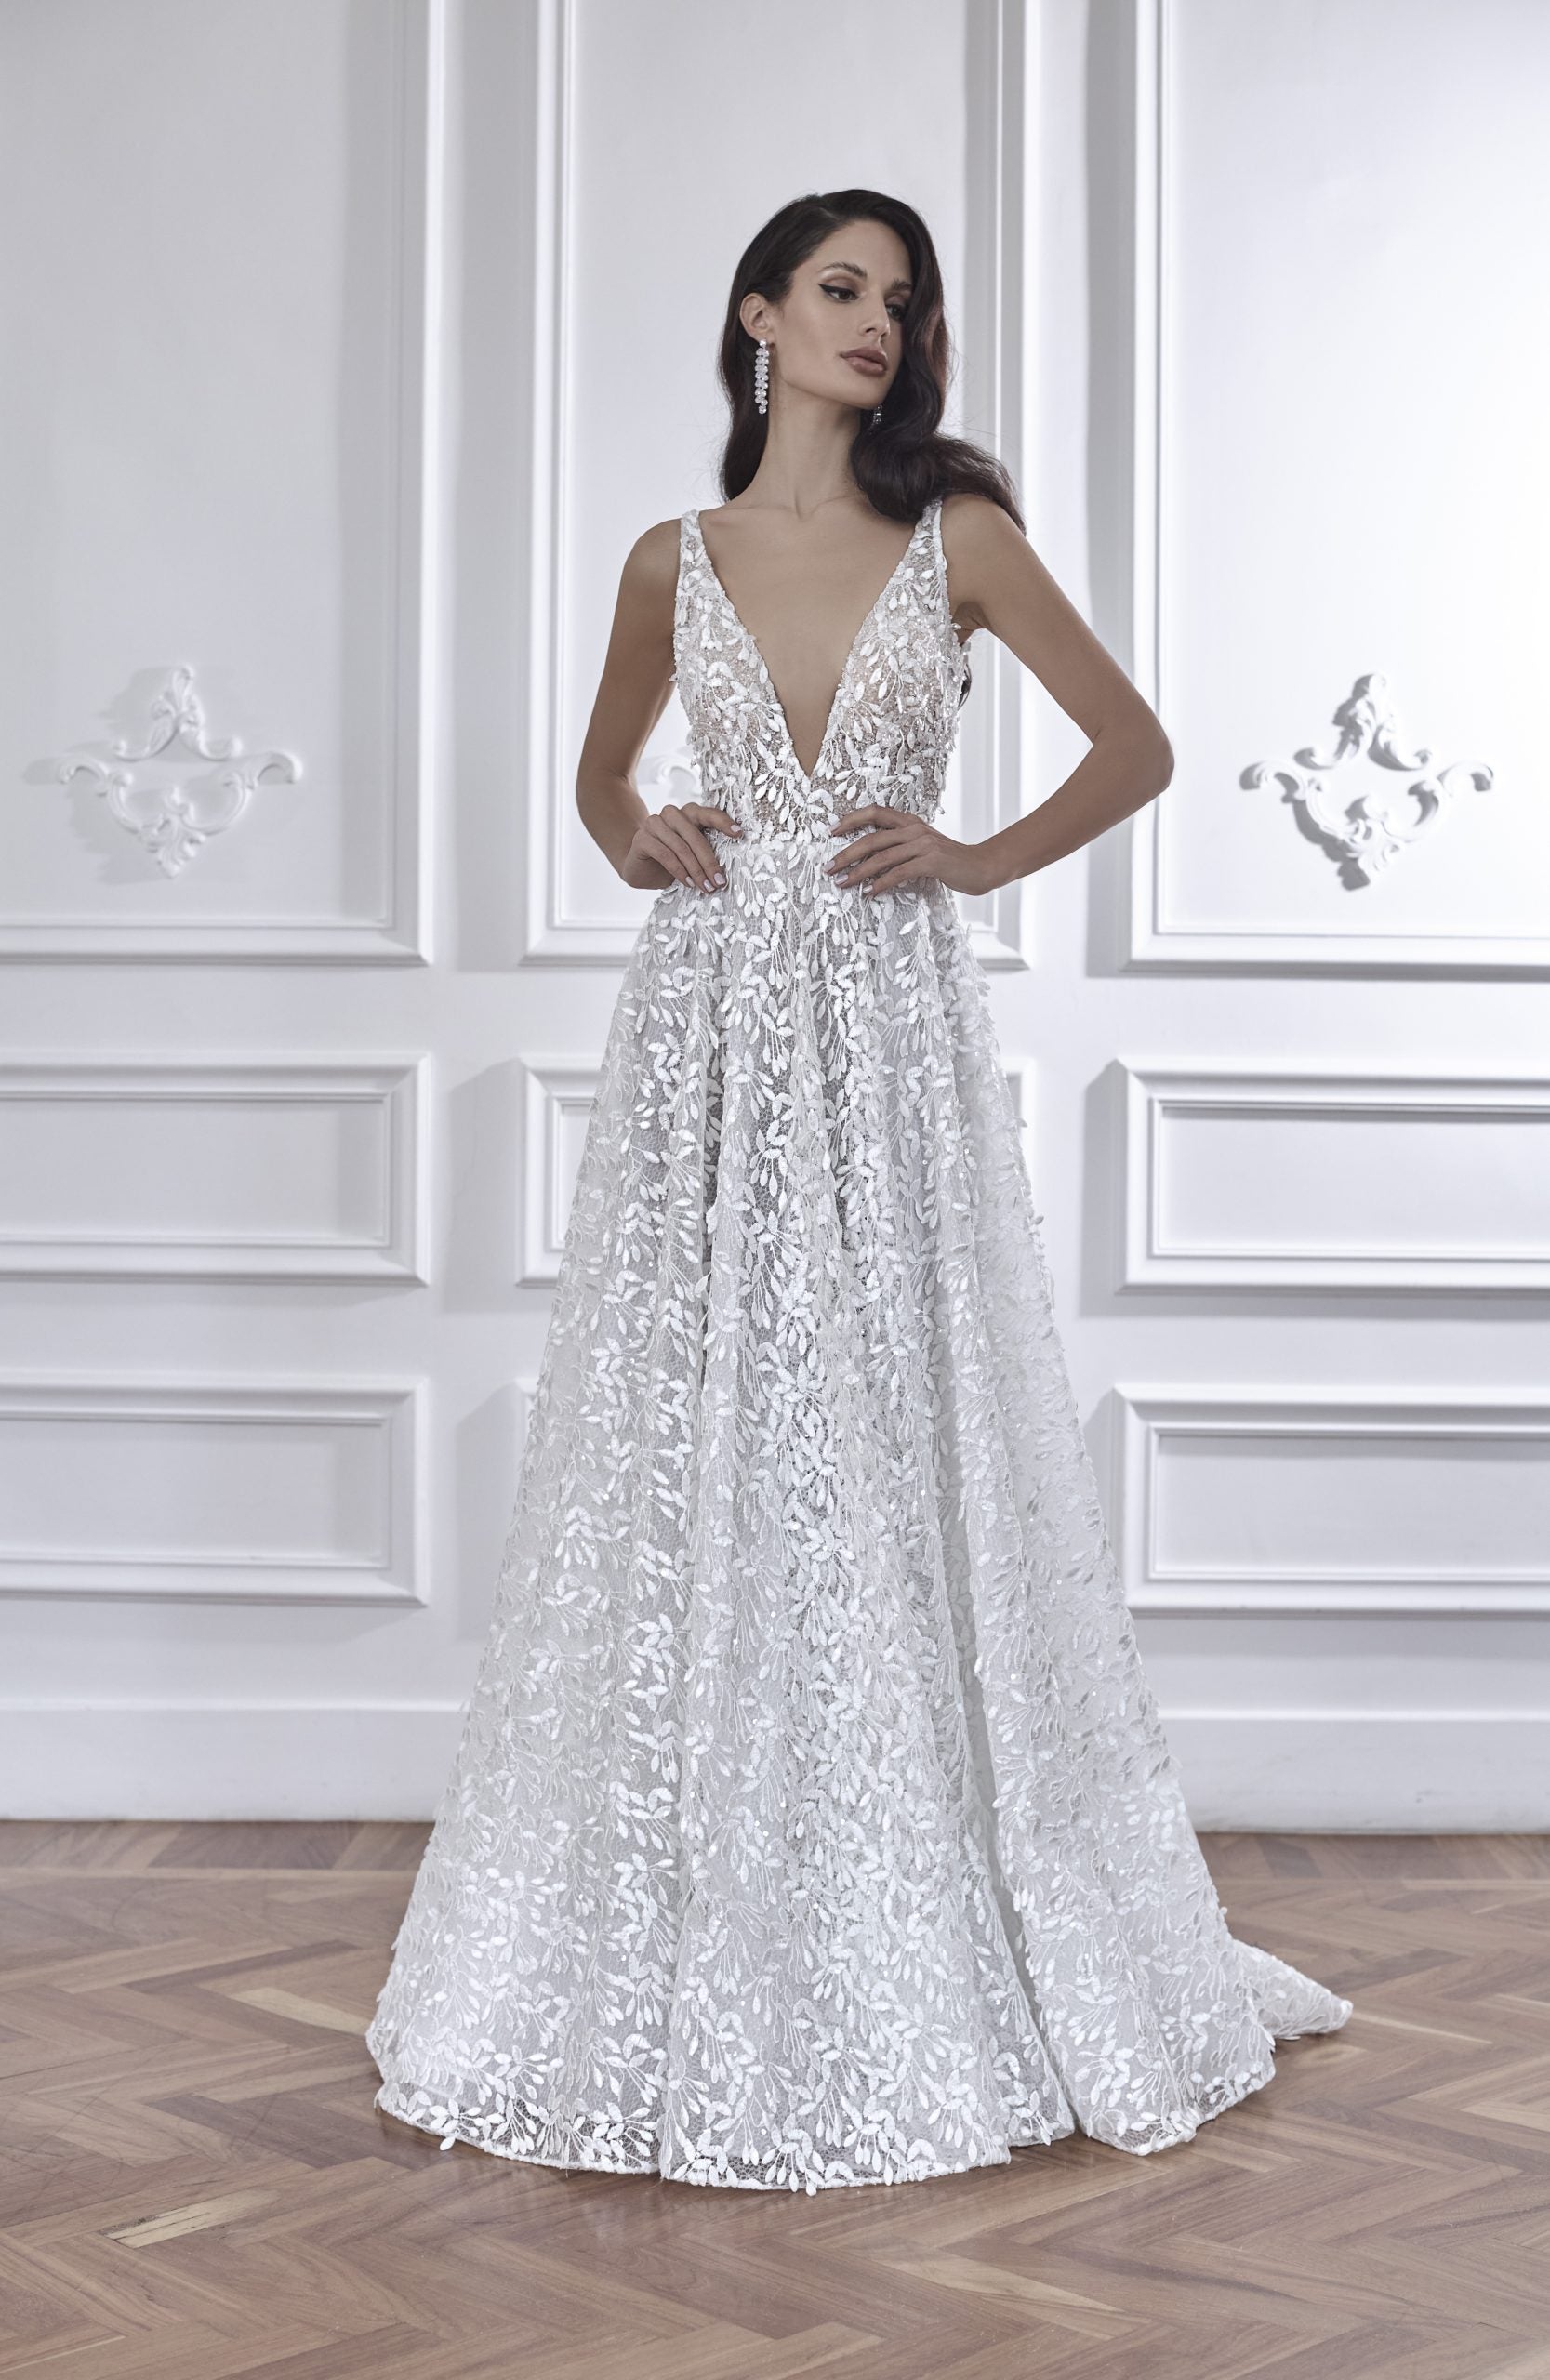 Sleeveless A-line Wedding Dress With Open Back by Maison Signore